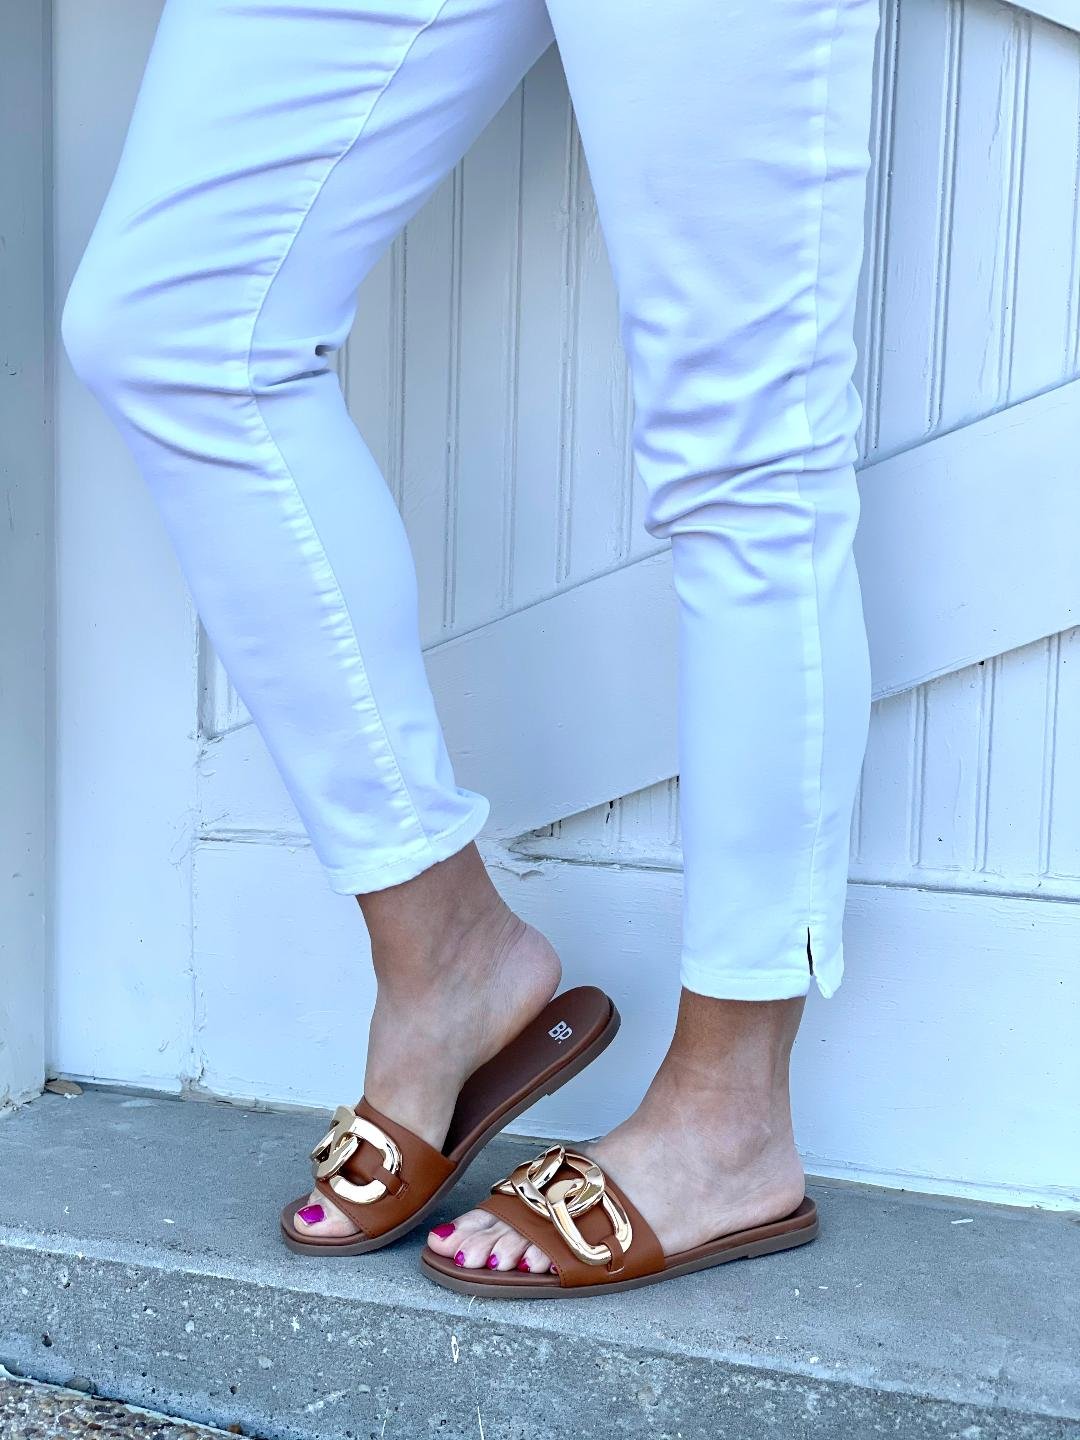 WHITE JEANS| 20+ Outfits! — Sheaffer Told Me To